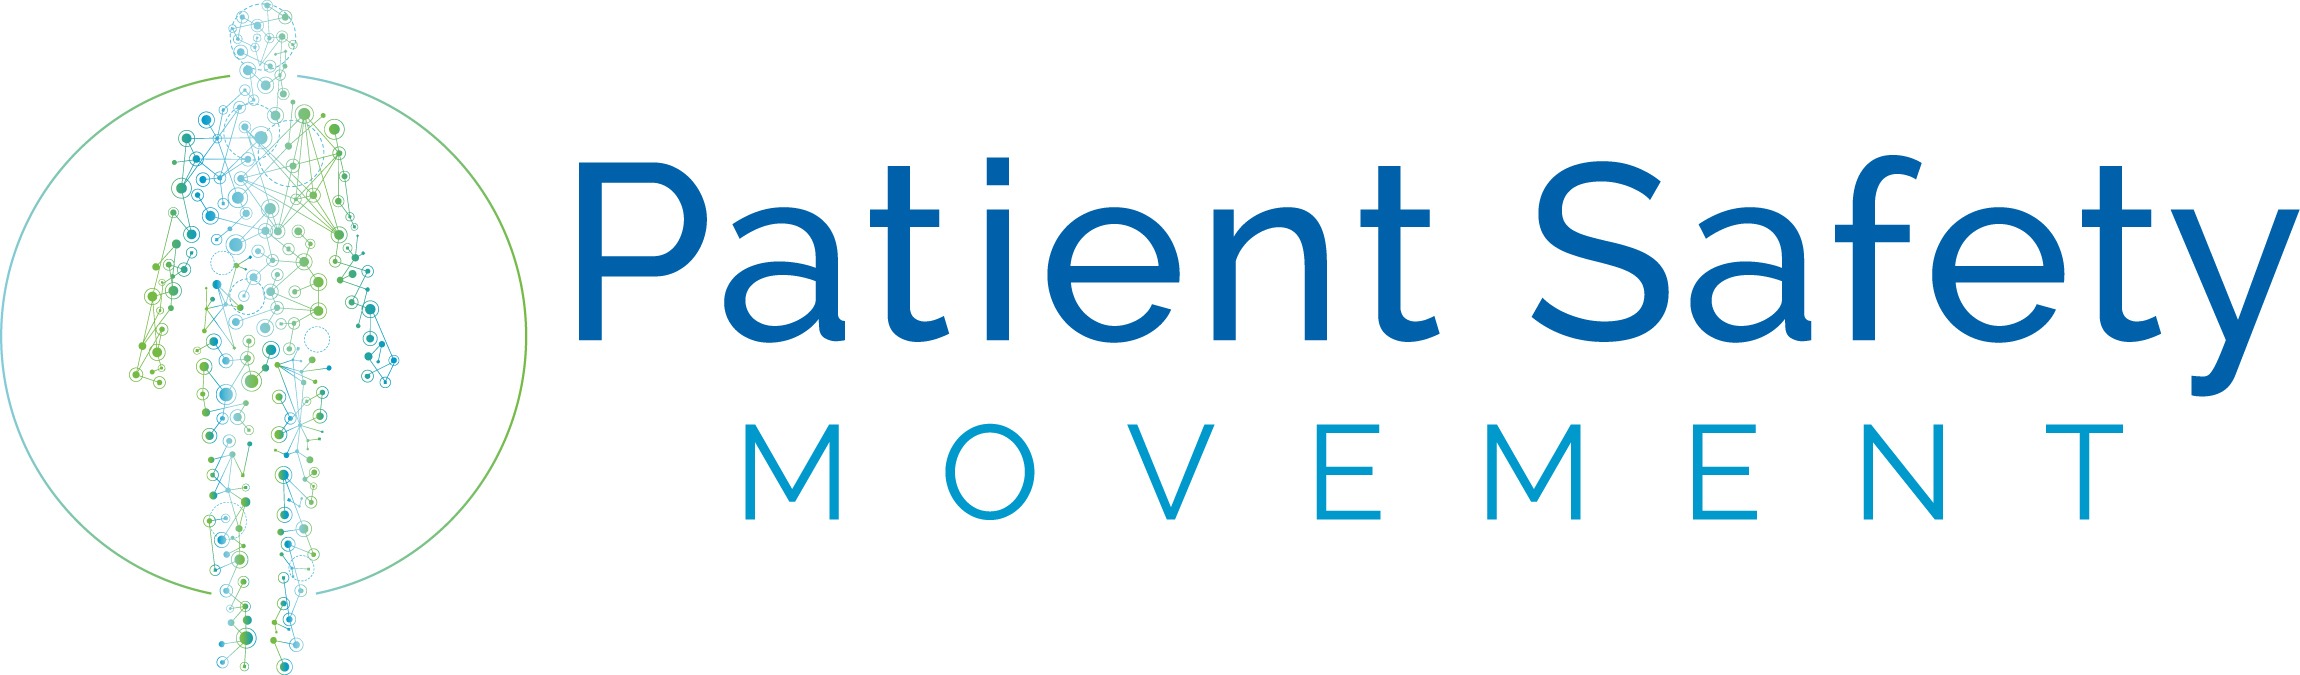 Text: Patient Safety Movement